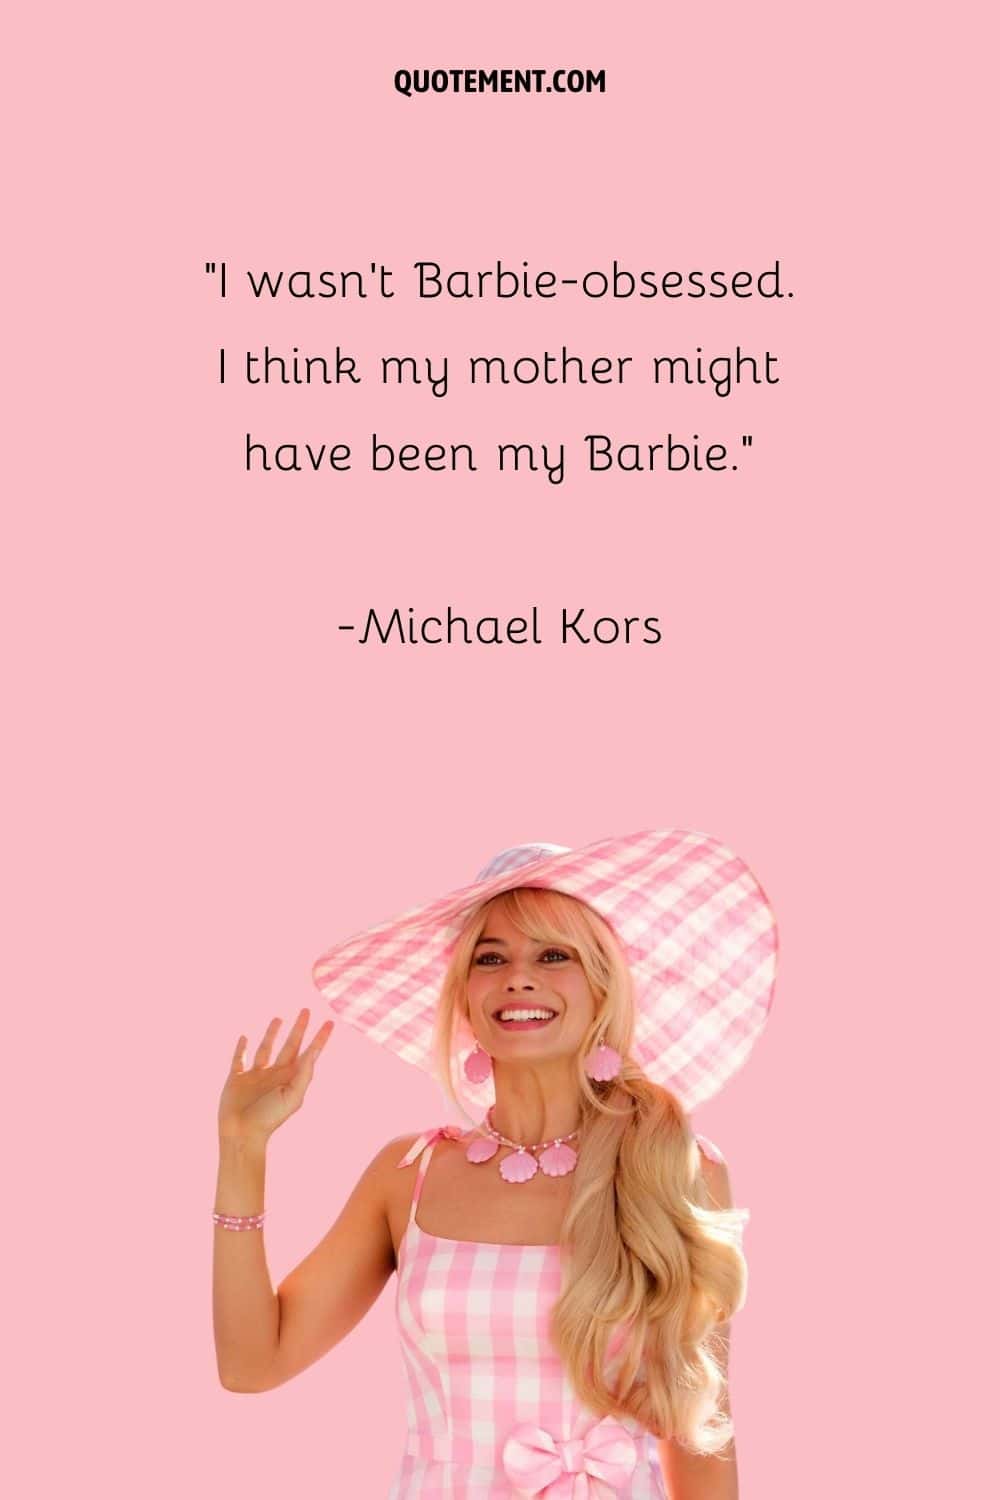 I wasn't Barbie-obsessed. I think my mother might have been my Barbie